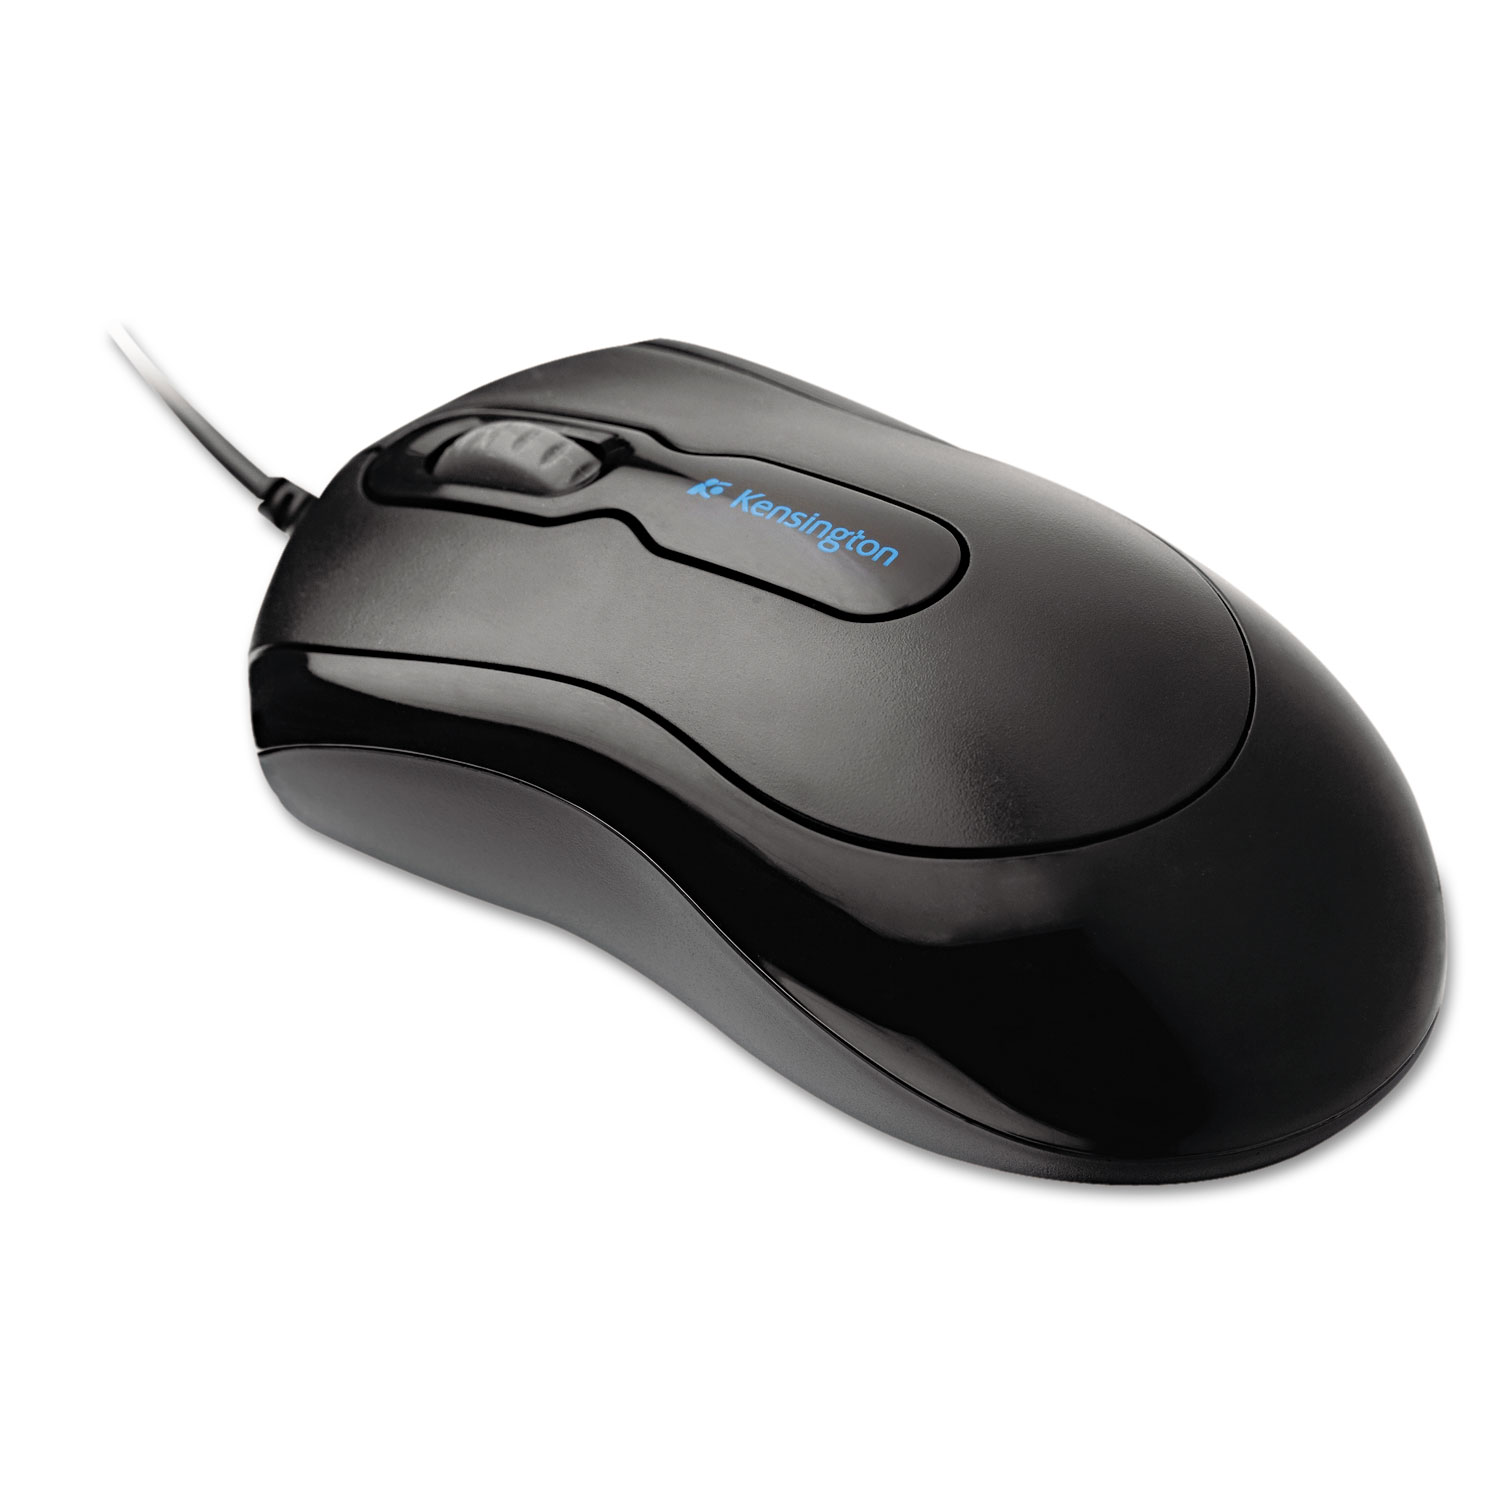  Kensington K72356US Mouse-In-A-Box Optical Mouse, USB 2.0, Left/Right Hand Use, Black (KMW72356) 